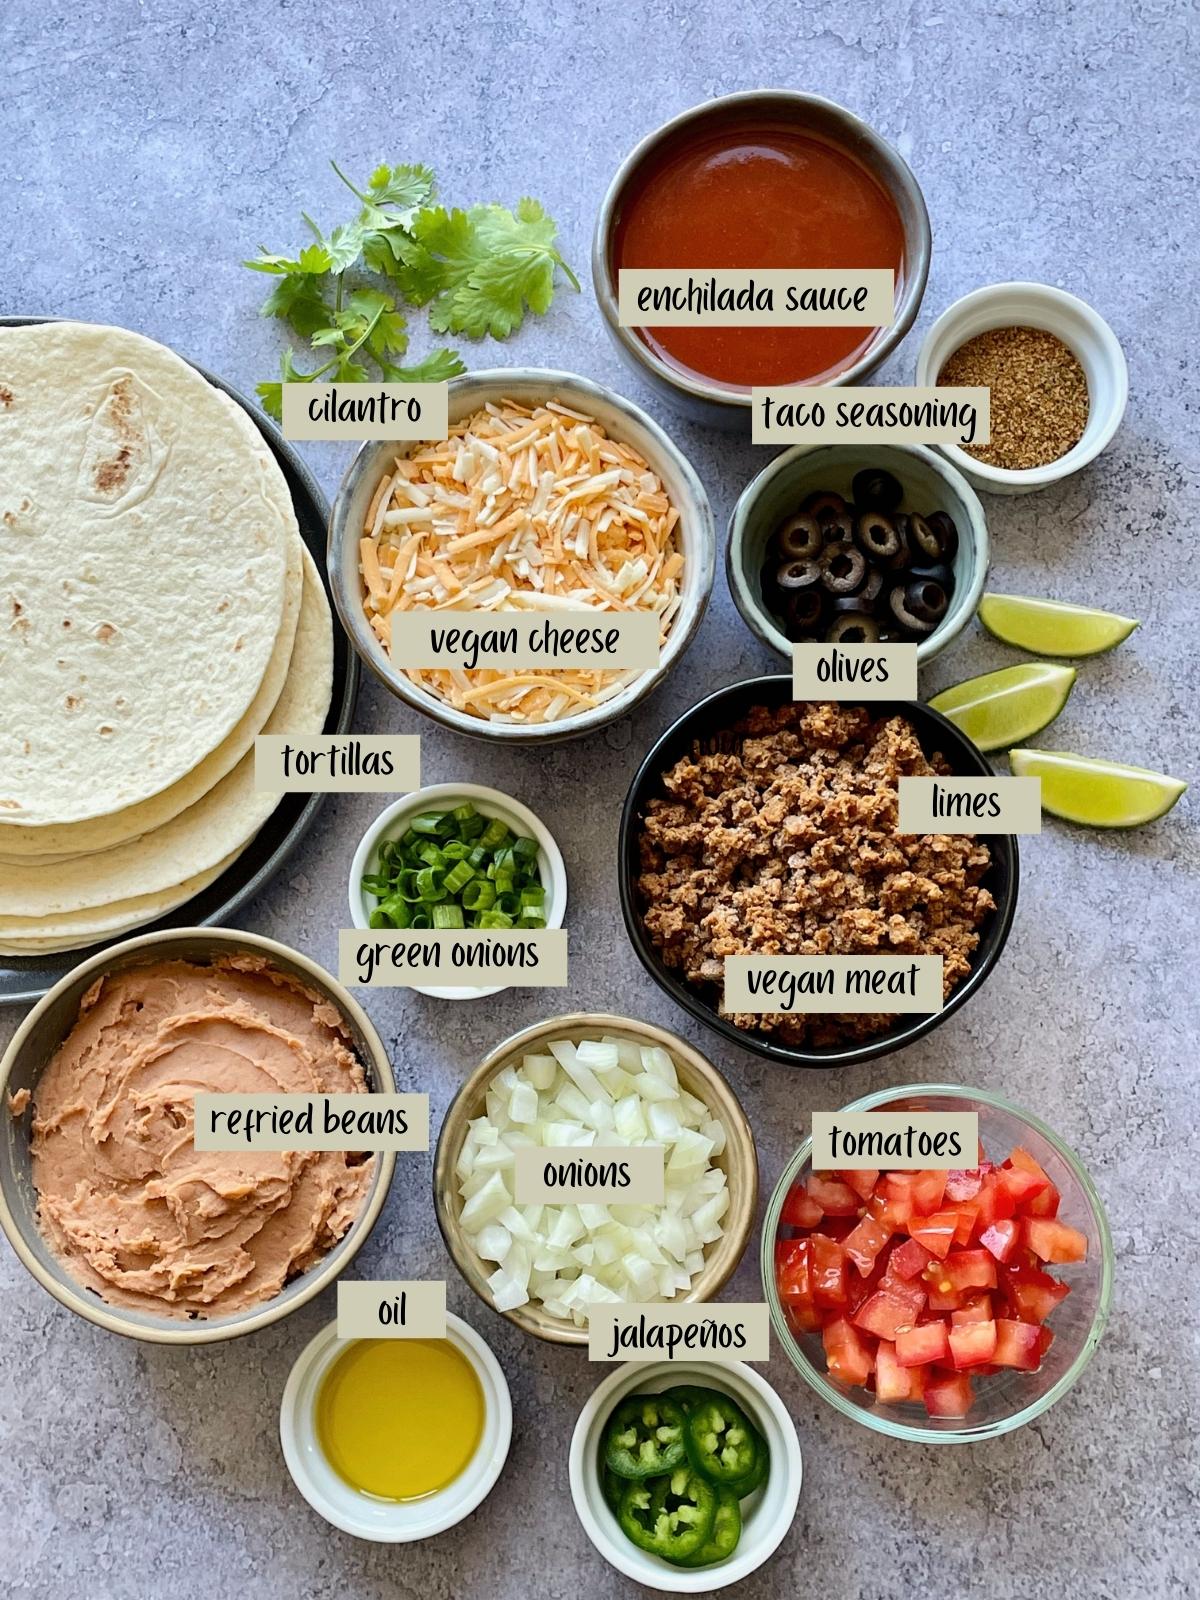 Labeled ingredients for Mexican pizzas.